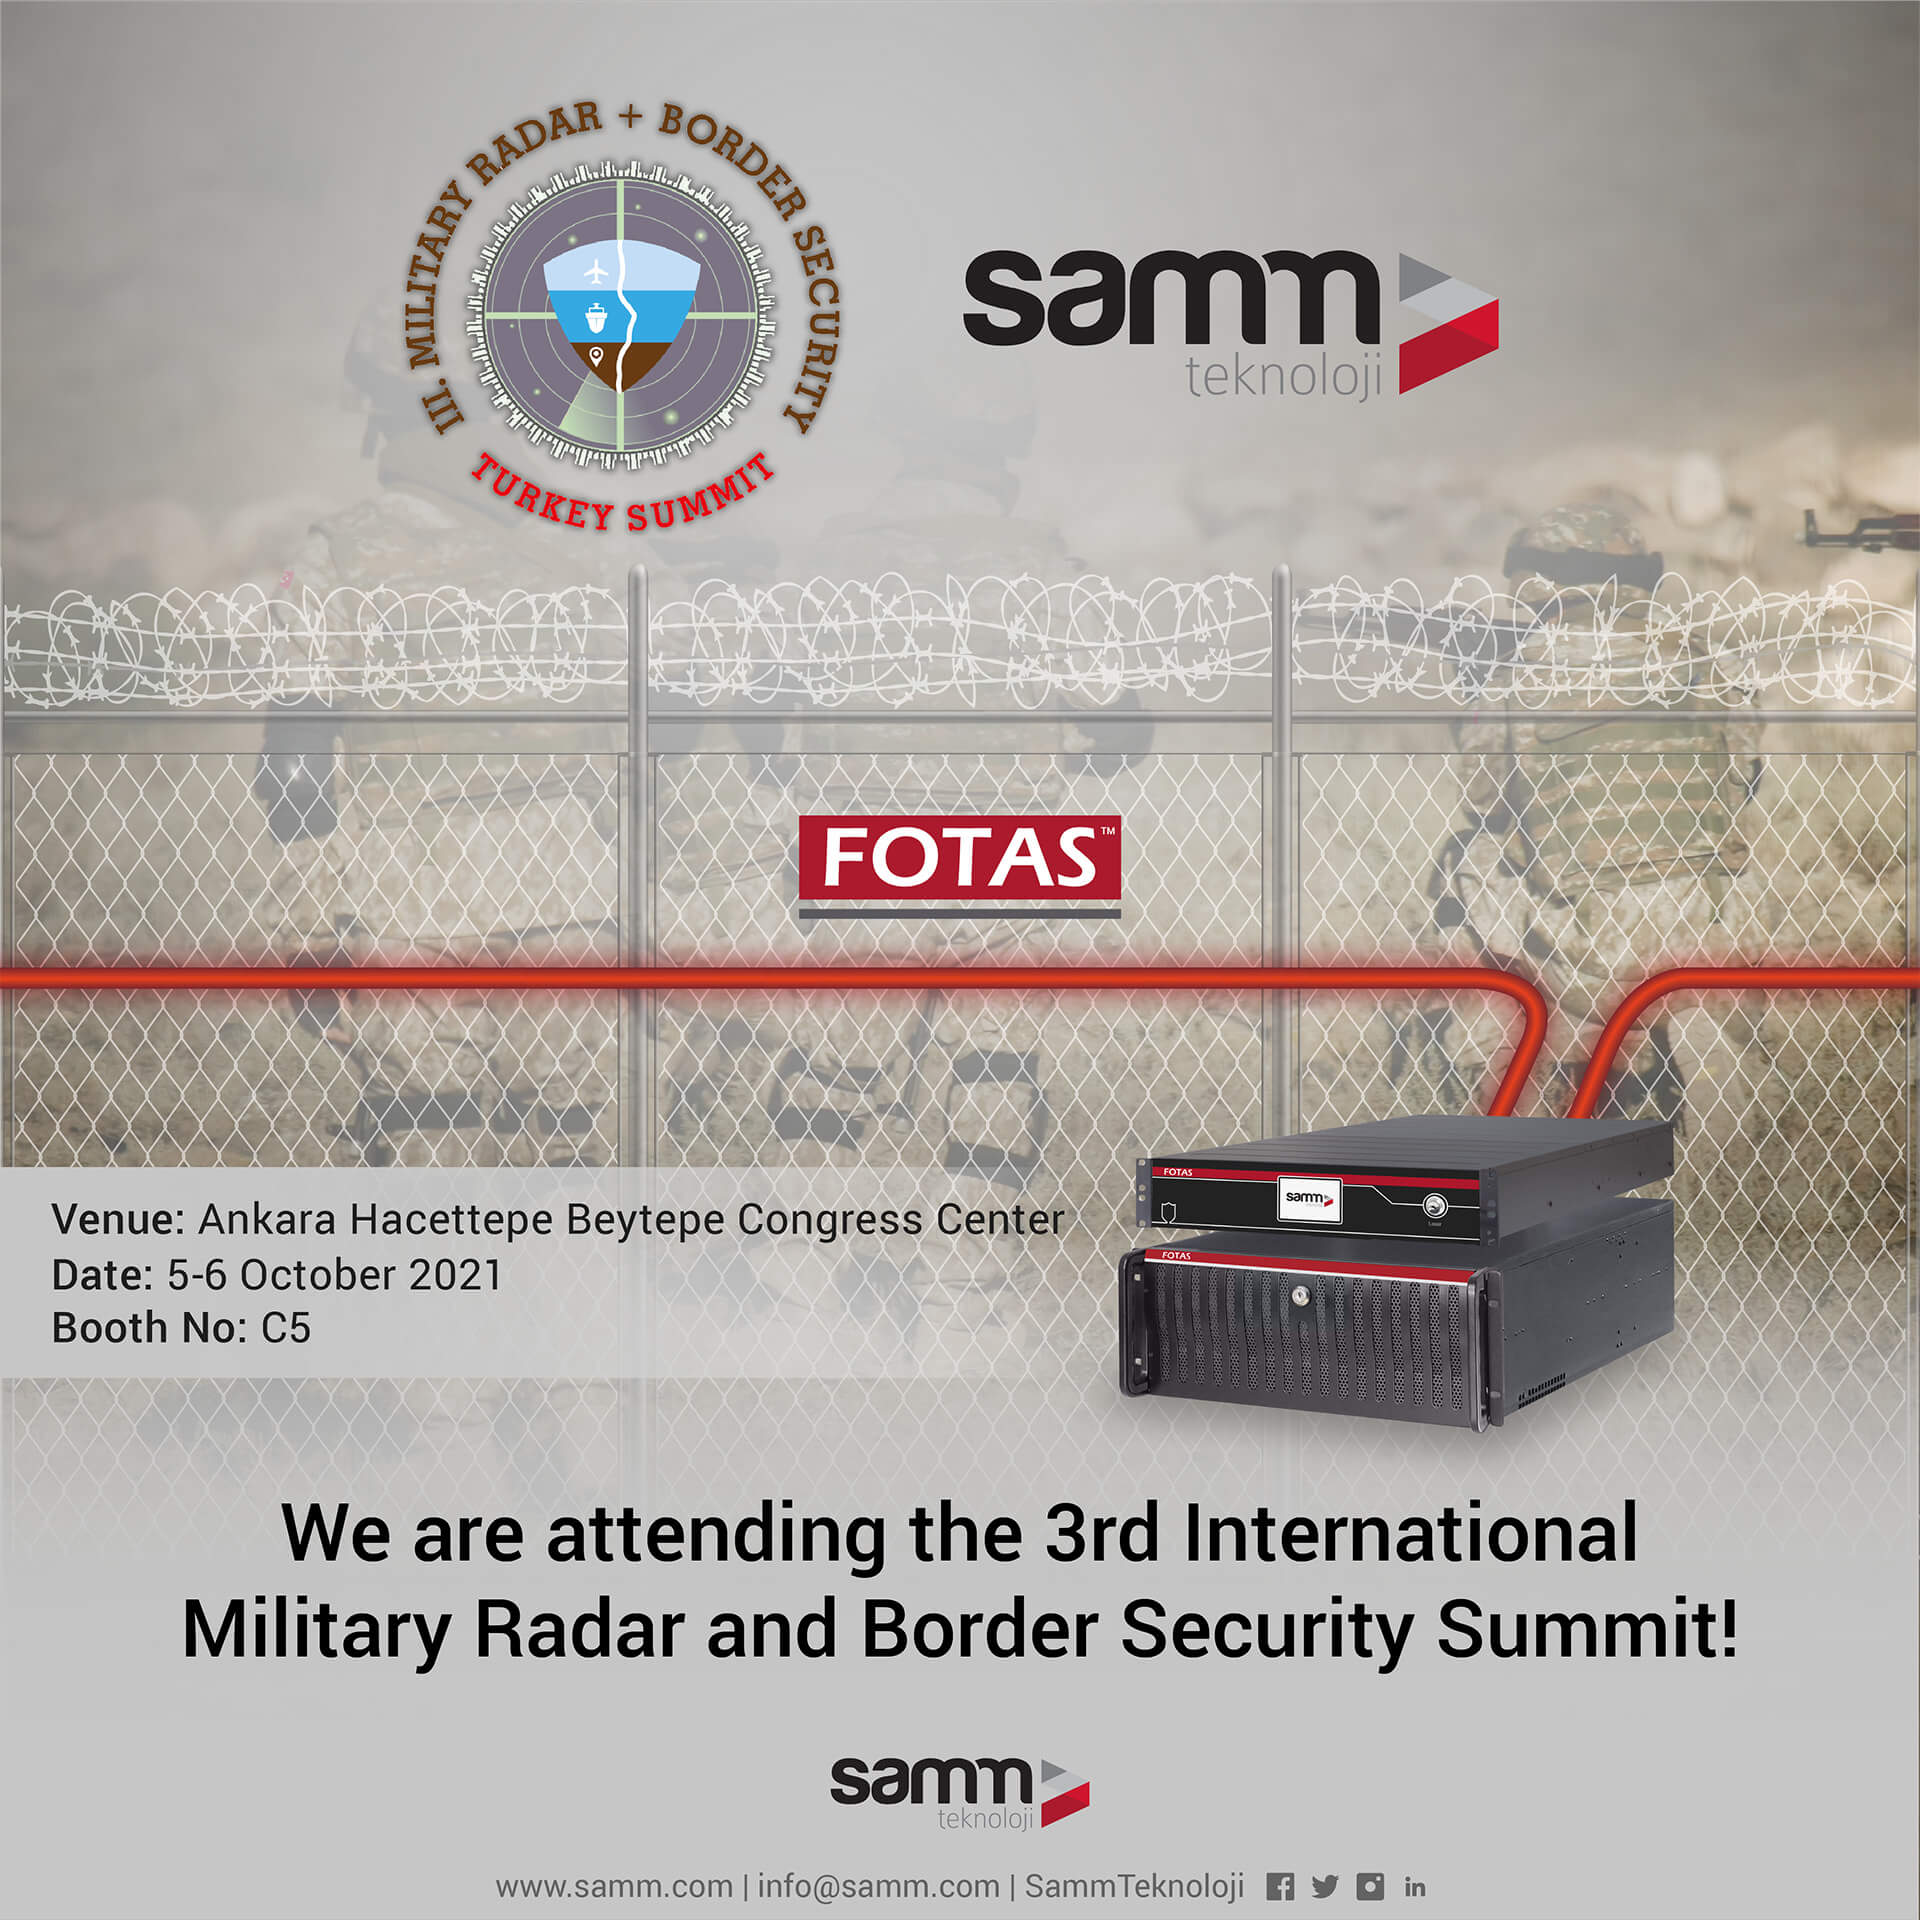 We are attending the 3rd International Military Radar and Border Security Summit!